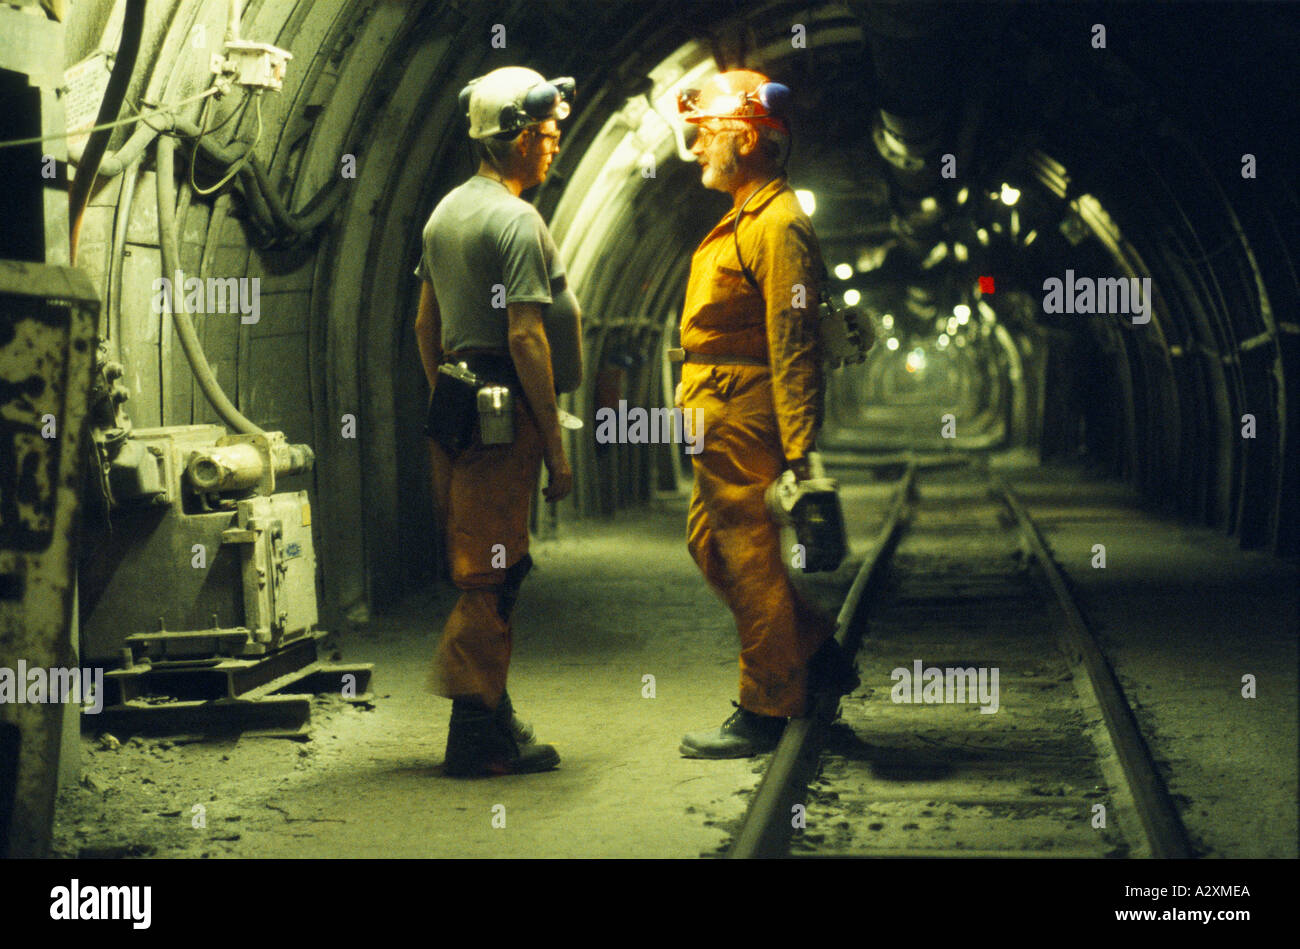 MINERS WITH SAFETY HELMETS & HEAD TORCH CHATTING IN UNDERGROUND TUNNEL WITH RAIL TRACKS. SHIREBROOK COLLIERY, NOTTINGHAMSHIRE. Stock Photo